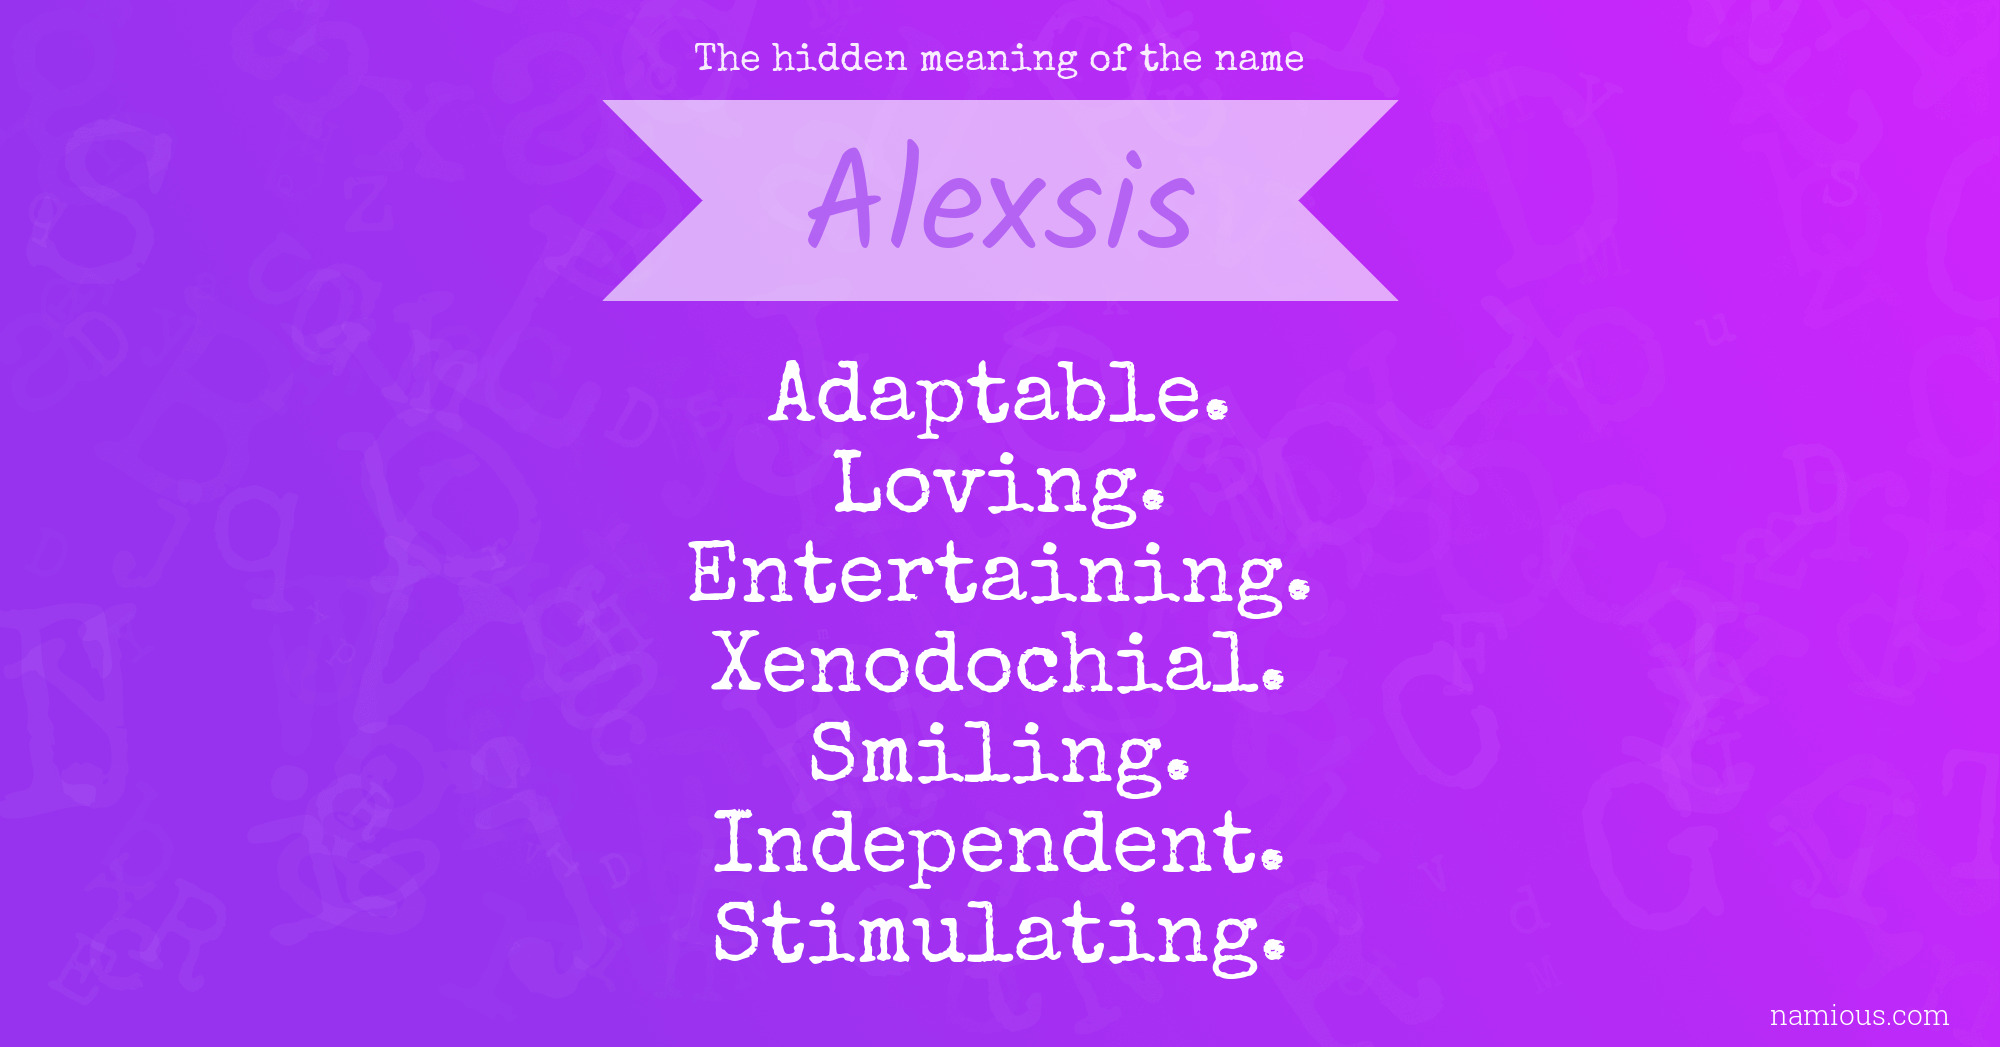 The hidden meaning of the name Alexsis